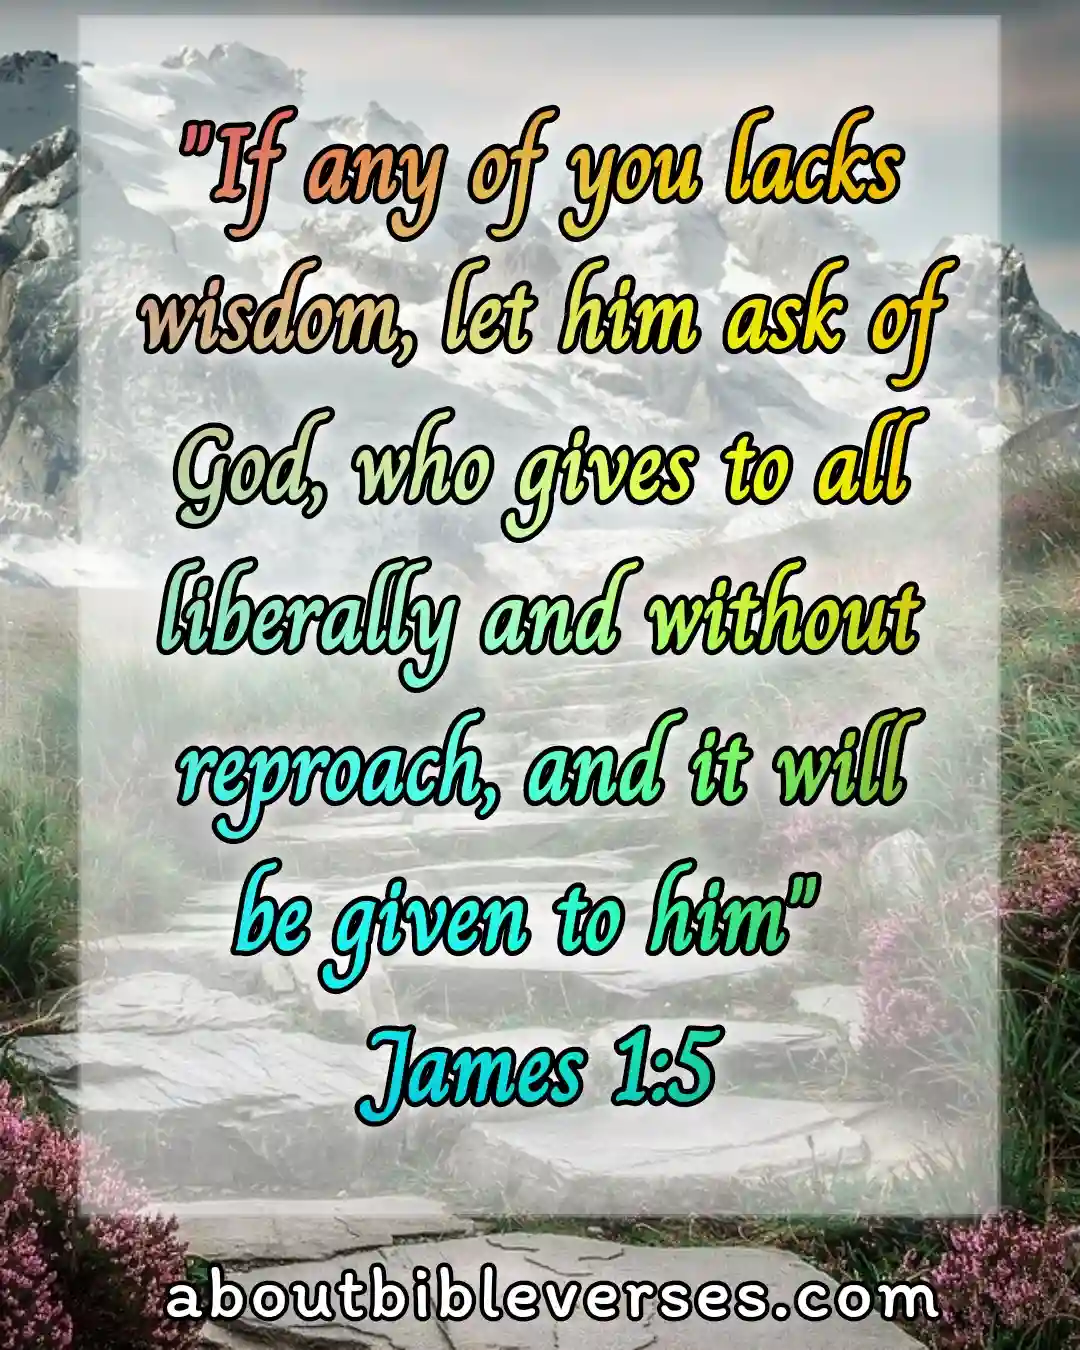 Bible Verses About Age And Wisdom (James 1:5)